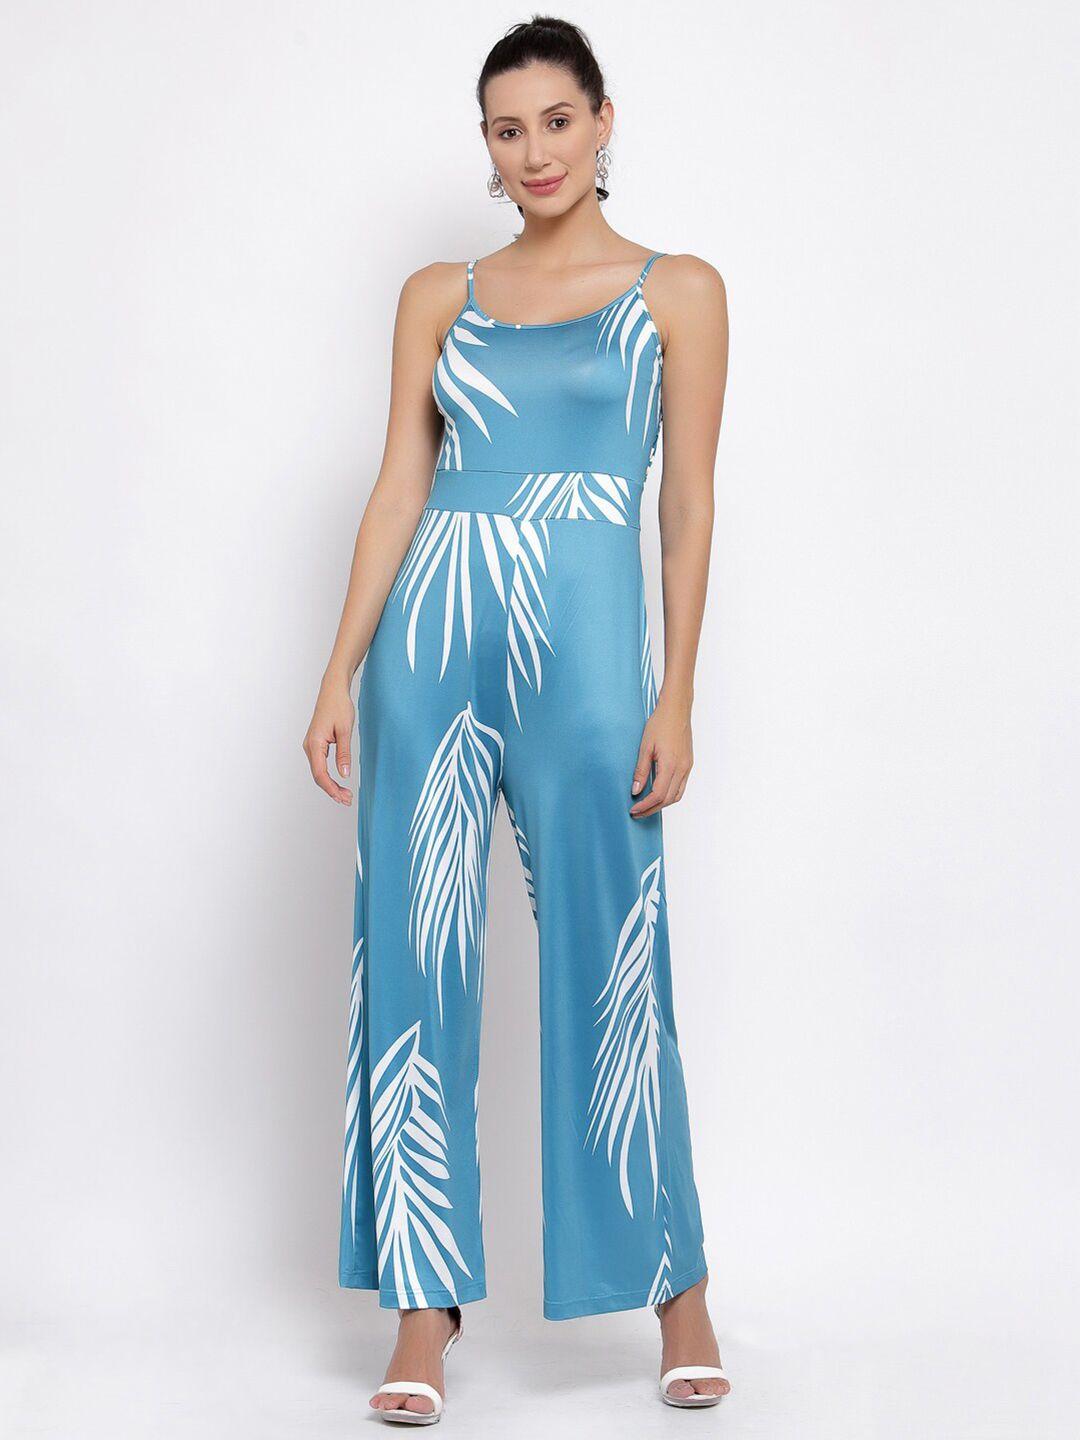 iki chic blue & white printed culotte jumpsuit